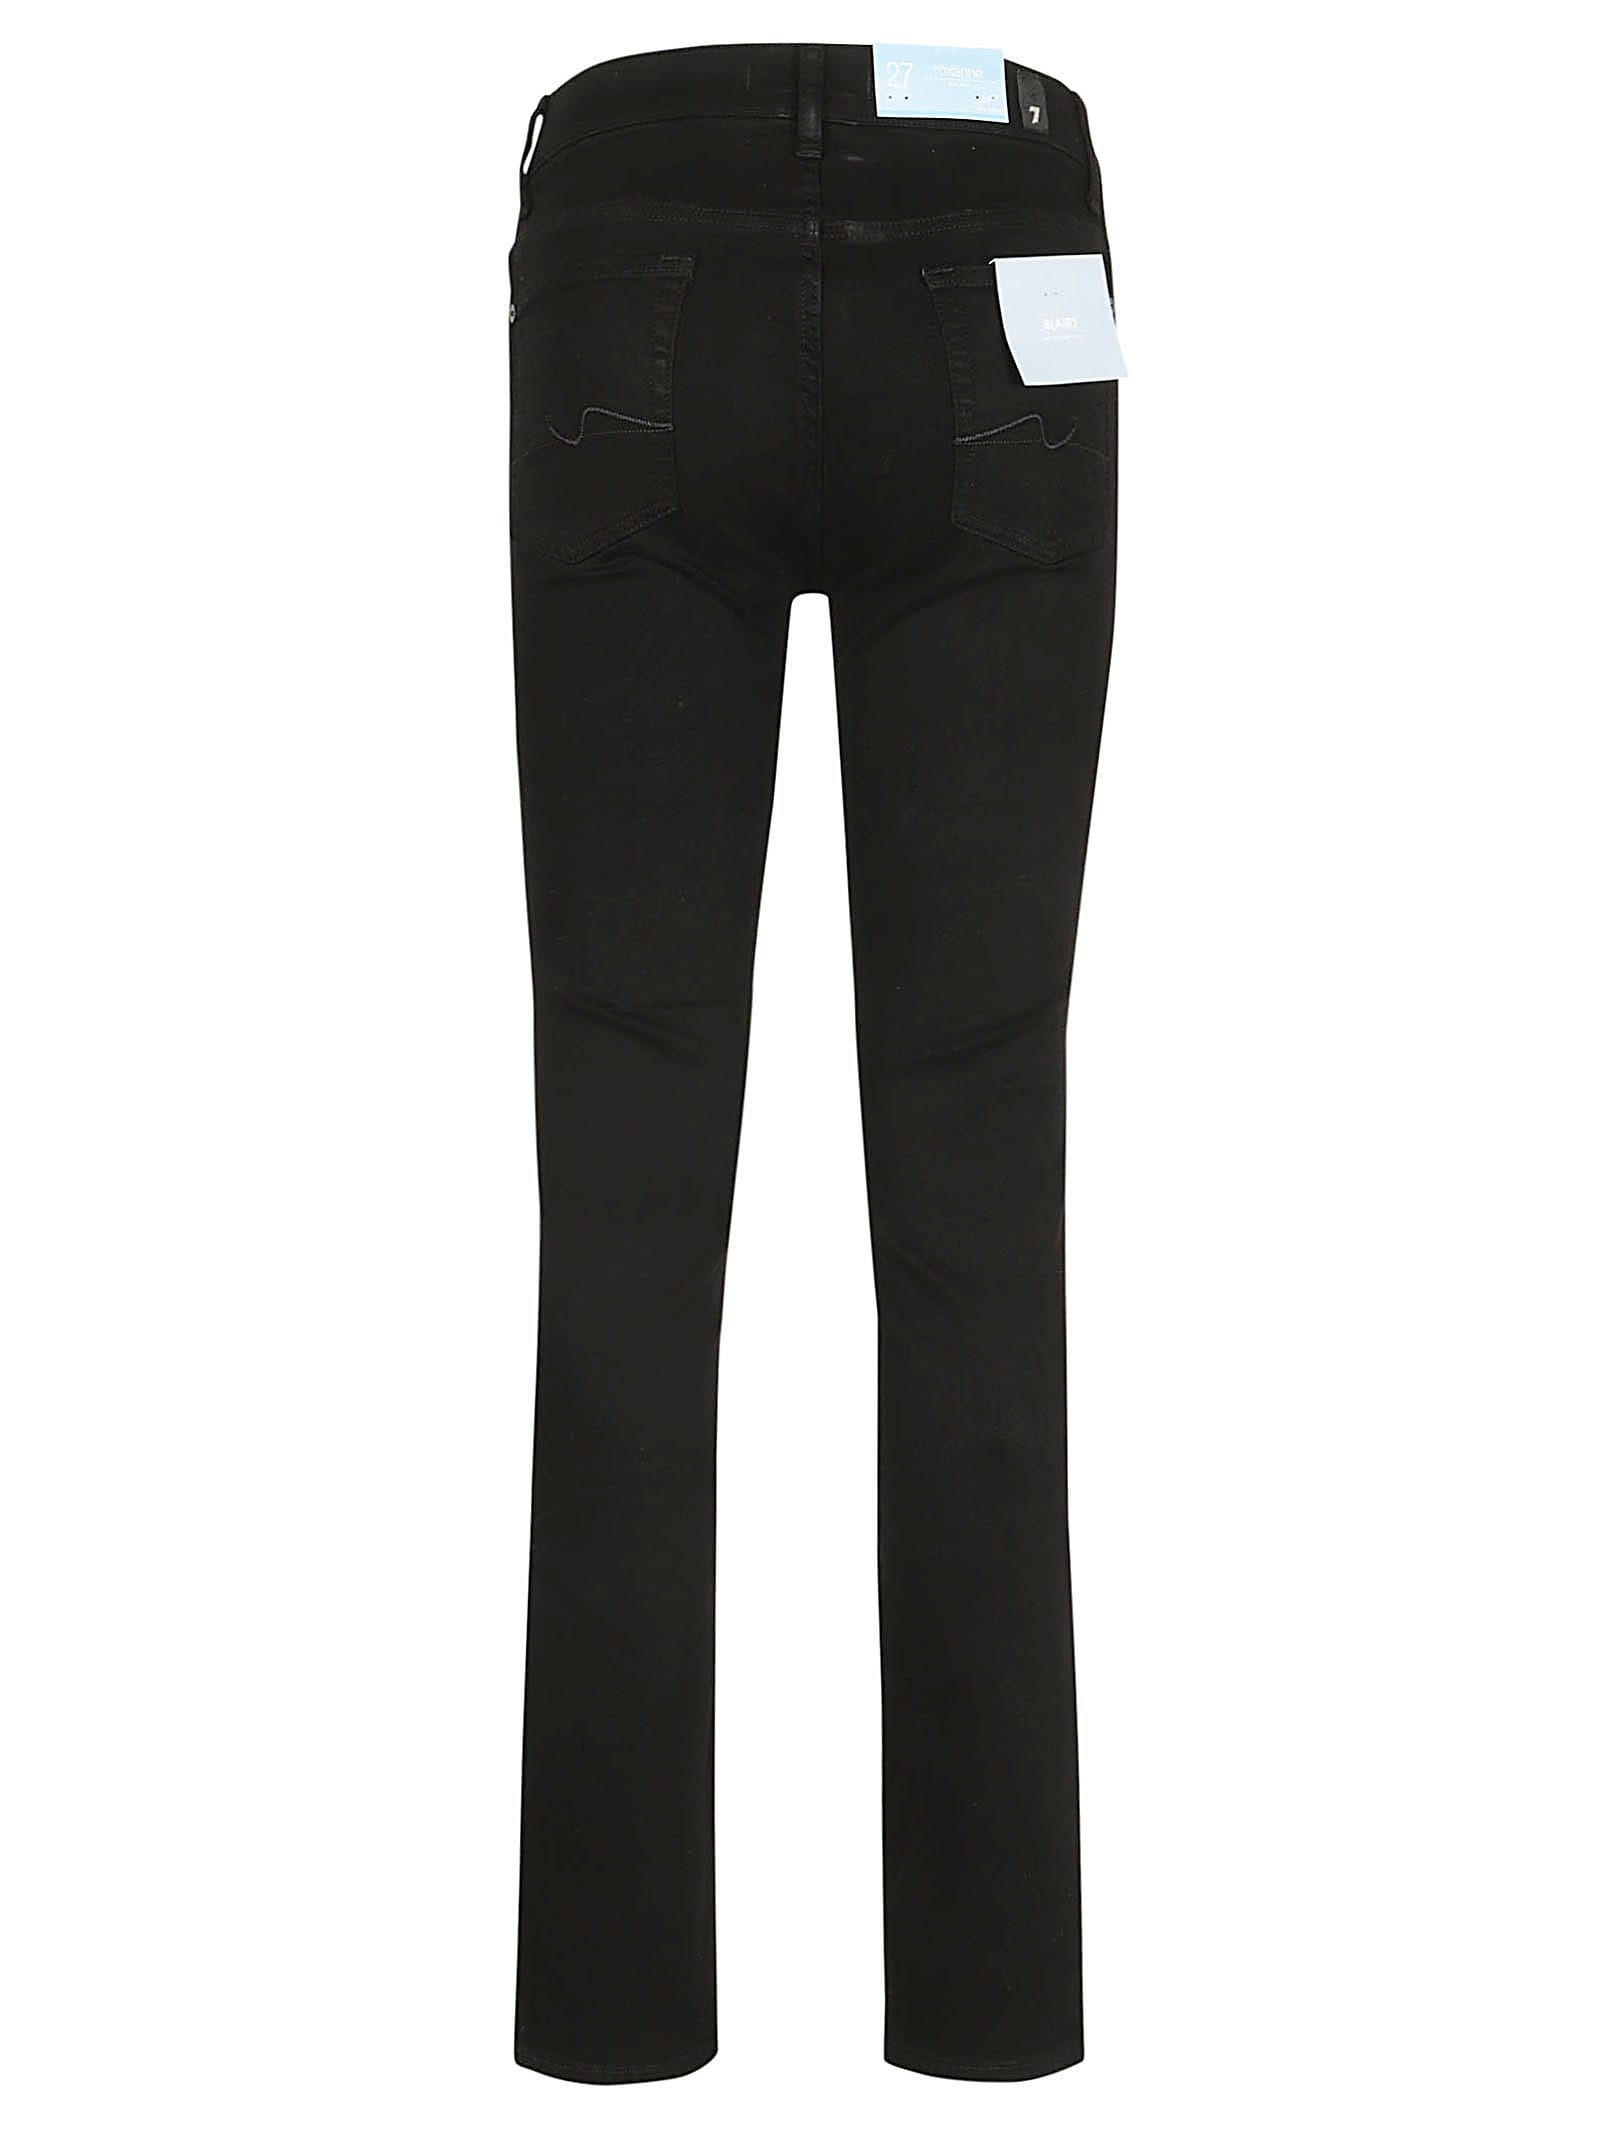 Shop 7 For All Mankind Roxanne Bair Eco Rinsed Black